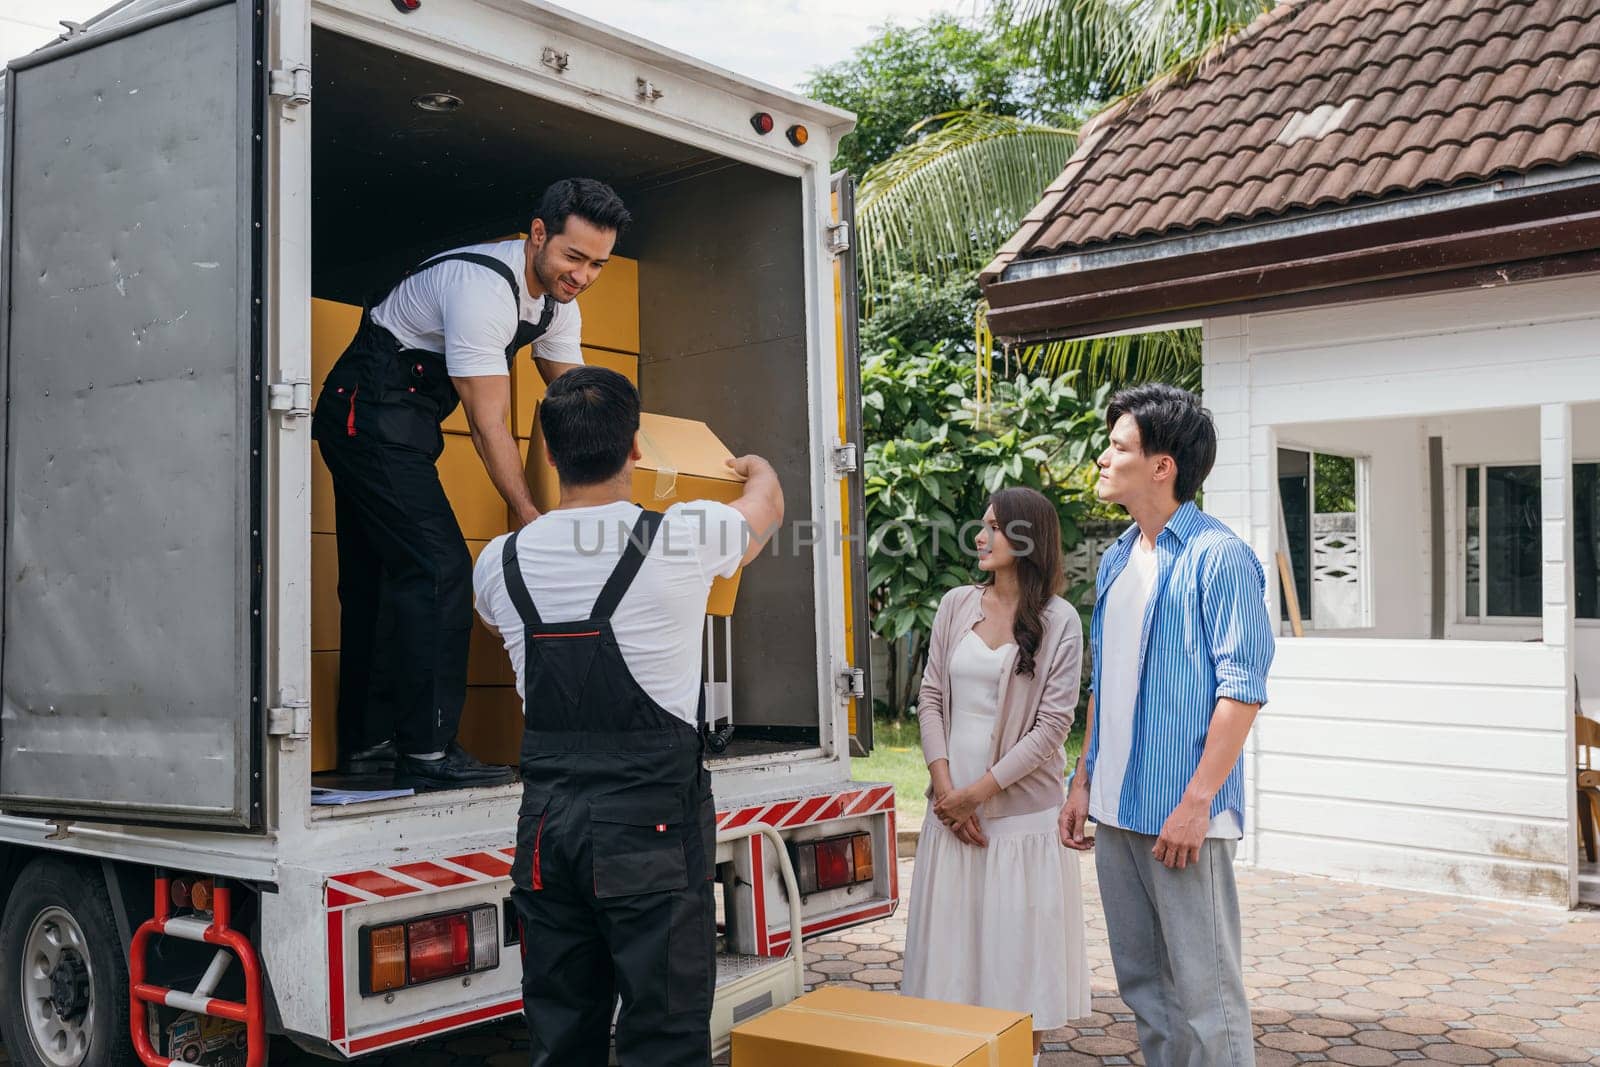 Newlywed couple receives seamless moving service to their new house. A dedicated team unloads and lifts cardboard boxes showcasing efficient delivery logistics. Moving Day Concept by Sorapop